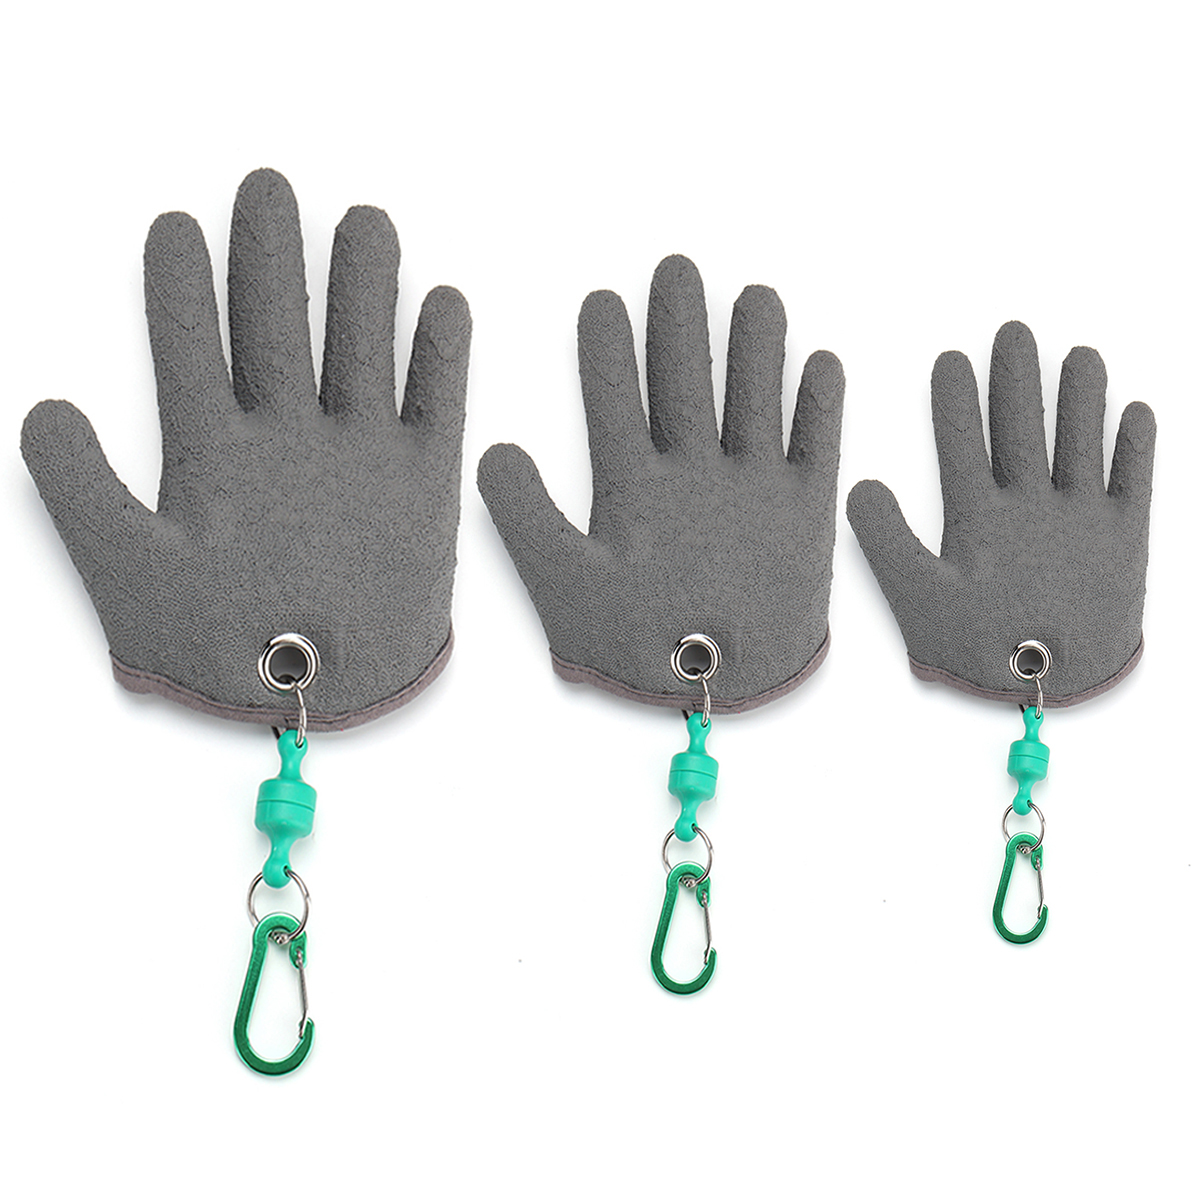 1pc-MLXL-Grey-Left-Cut-Resistant-Fishing-Glove-Protective-Safety-Gloves-Knife-Slash-Proof-Gloves-1335684-2